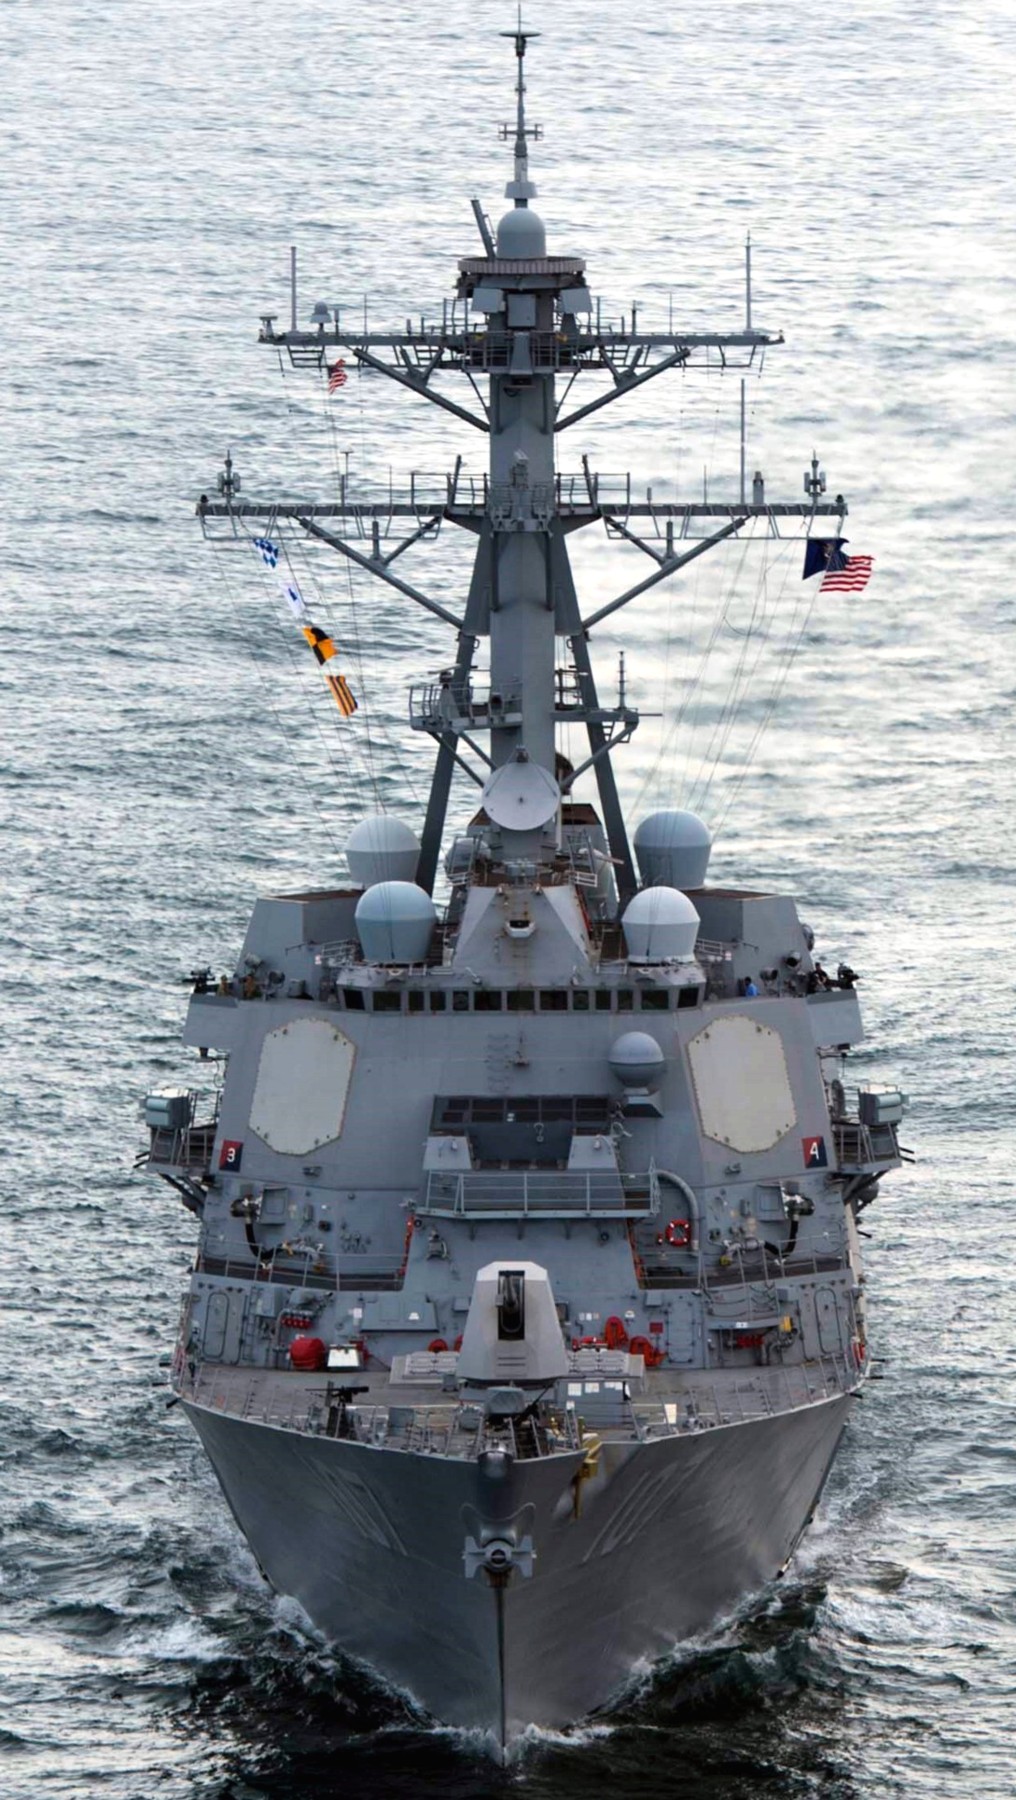 ddg-107 uss gravely arleigh burke class guided missile destroyer aegis us navy gulf of oman 05p